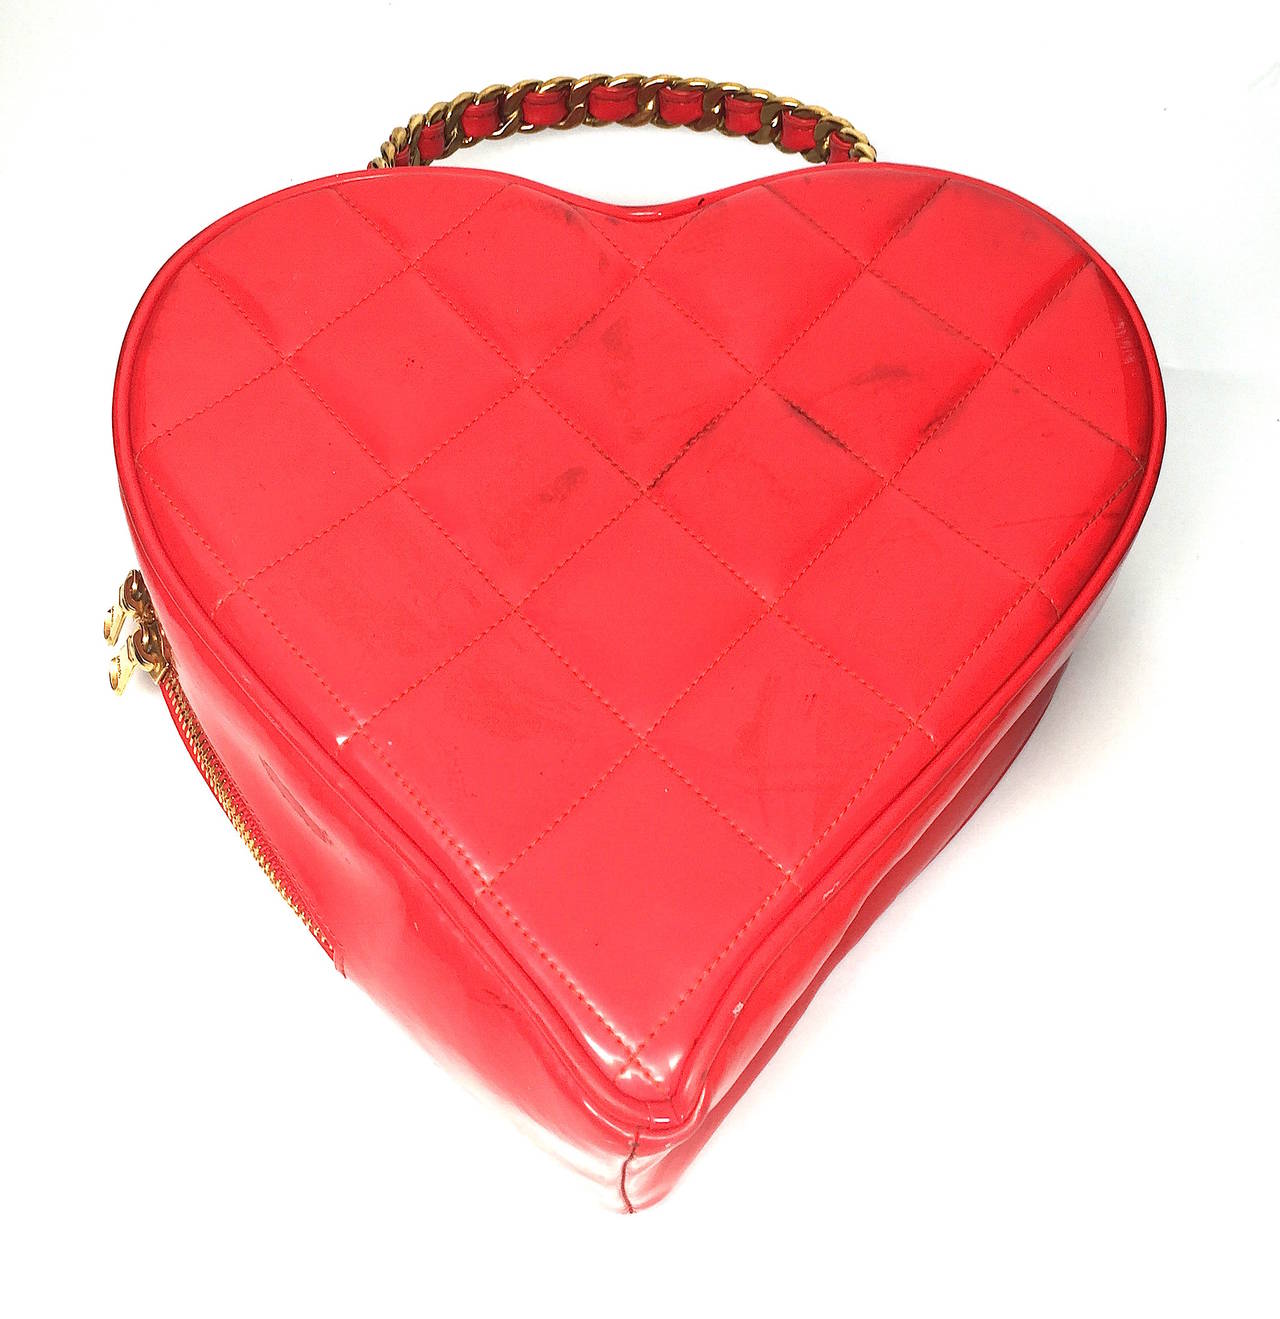 Rare, vintage Chanel quilted red patent leather CC logo heart handbag with gold-tone chain handle and top zippered closure. Features red lambskin interior and heart shape. The bag is in good vintage condition with mild to moderate color transfer on